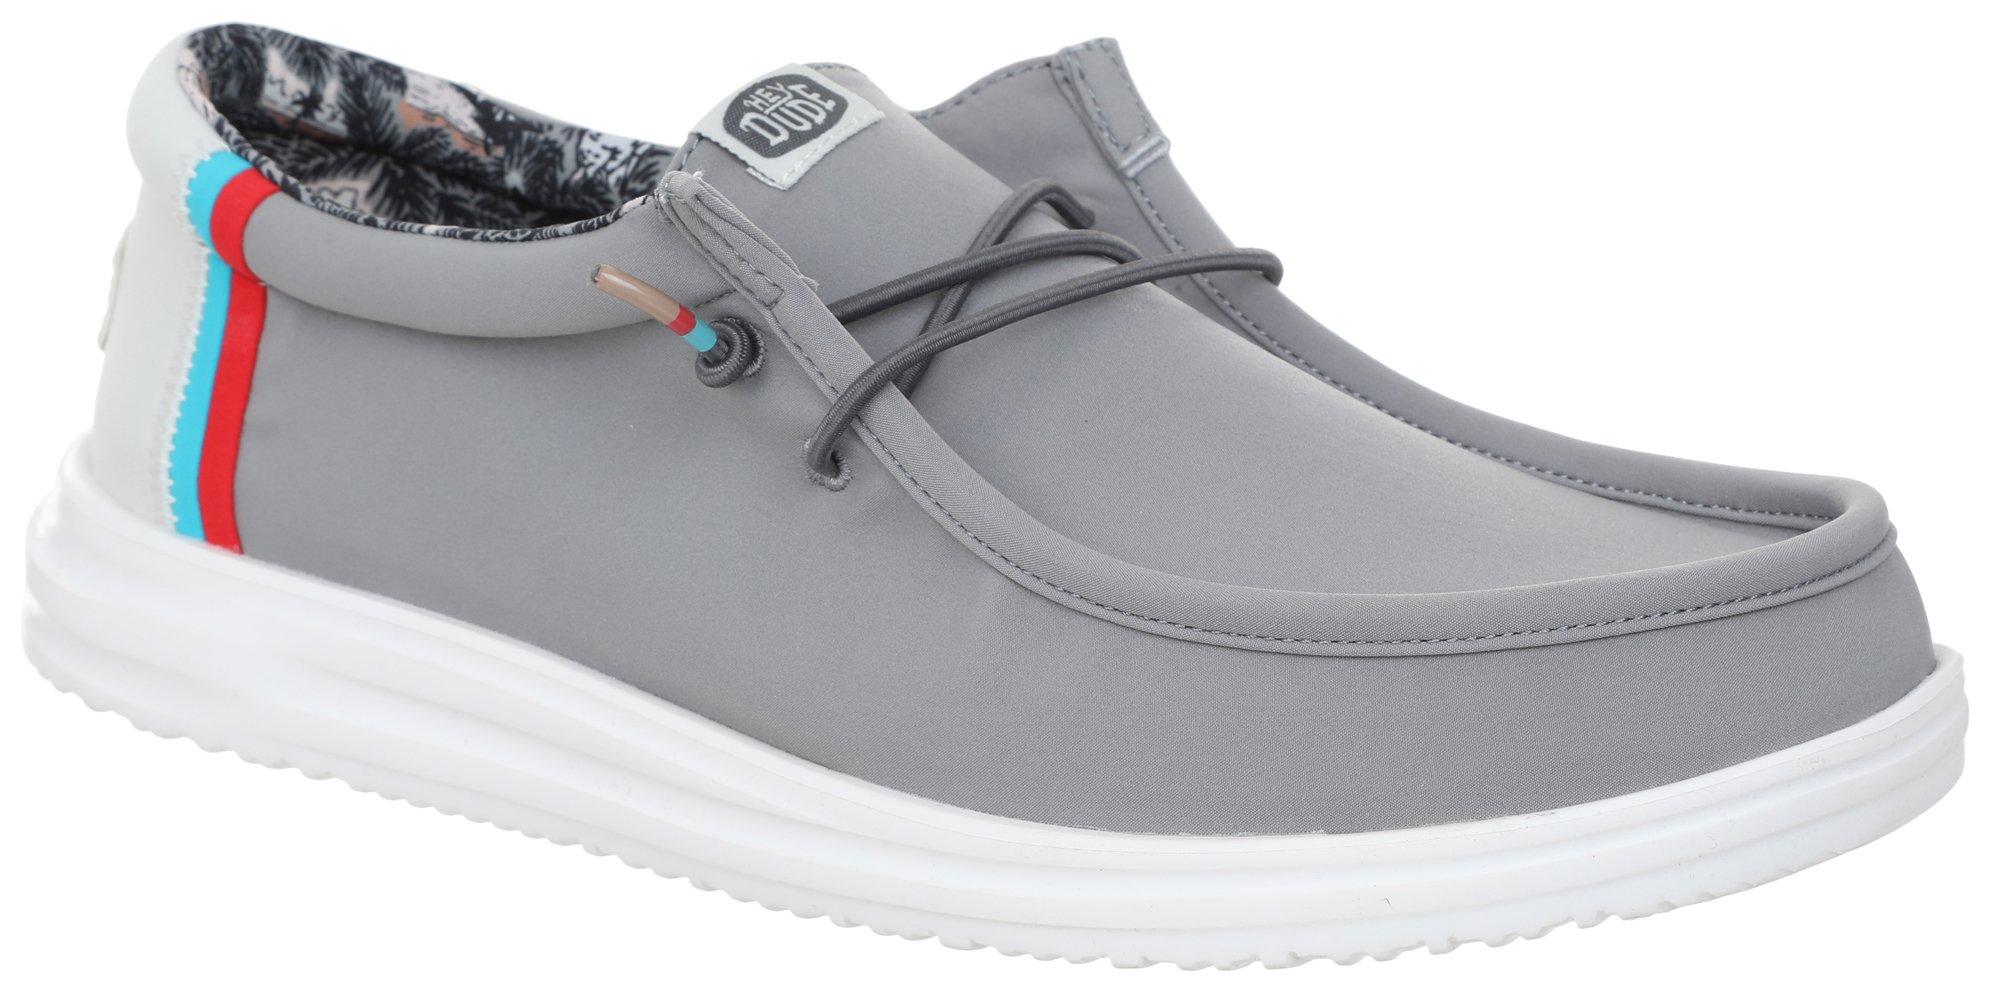 Mens Wally H20 Surf Canvas Shoes